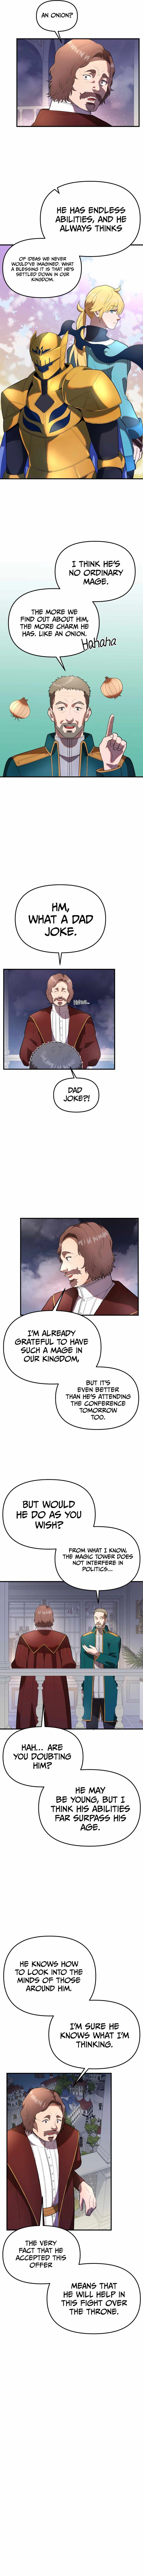 Golden Mage Chapter 30